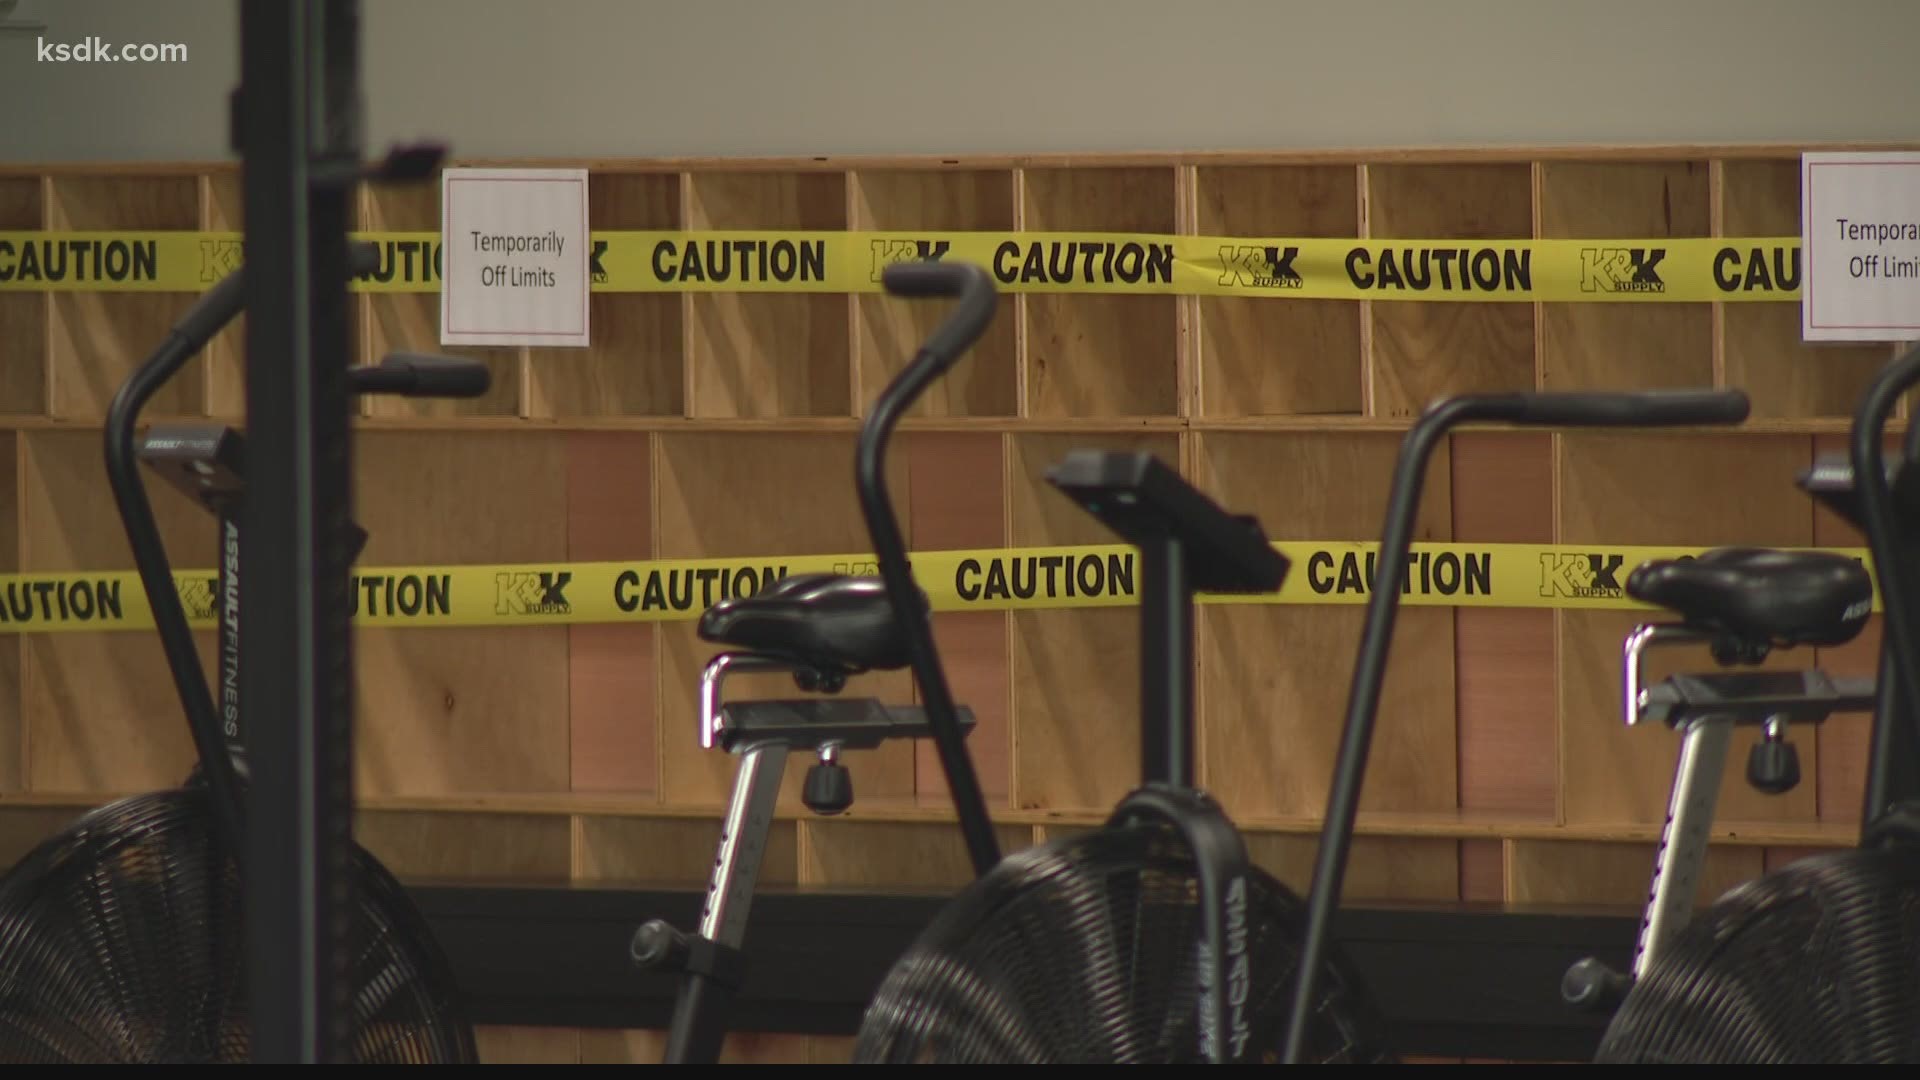 After months of sweating it out, gym owners hope increased safety precautions are enough to prevent a second round of closures.